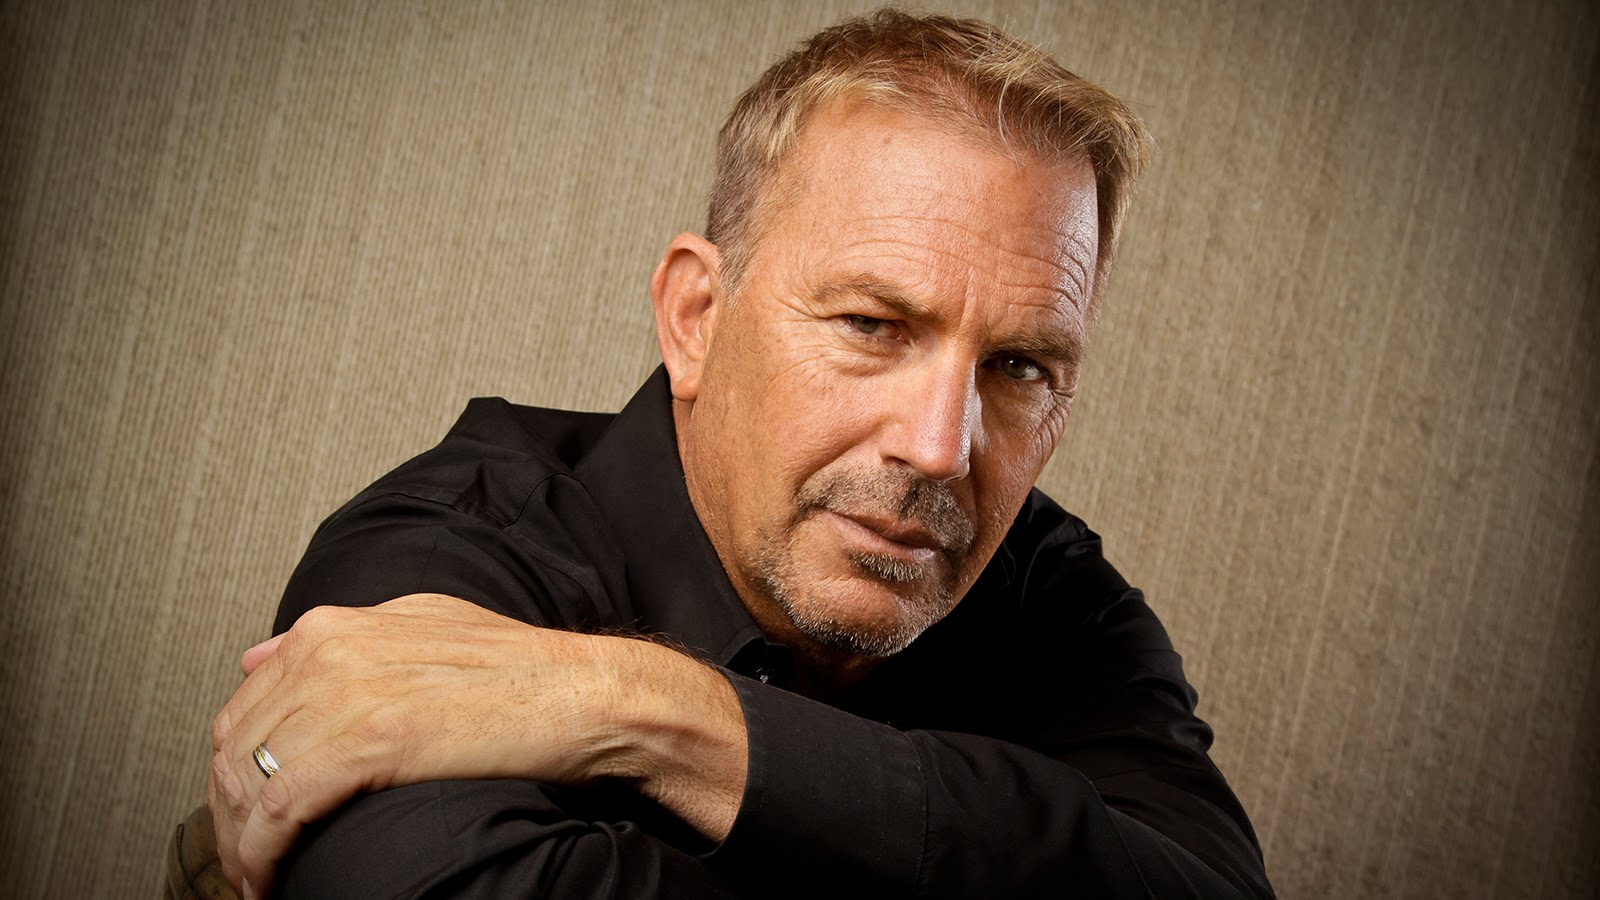 Kevin Costner Backgrounds, Compatible - PC, Mobile, Gadgets| 1600x900 px